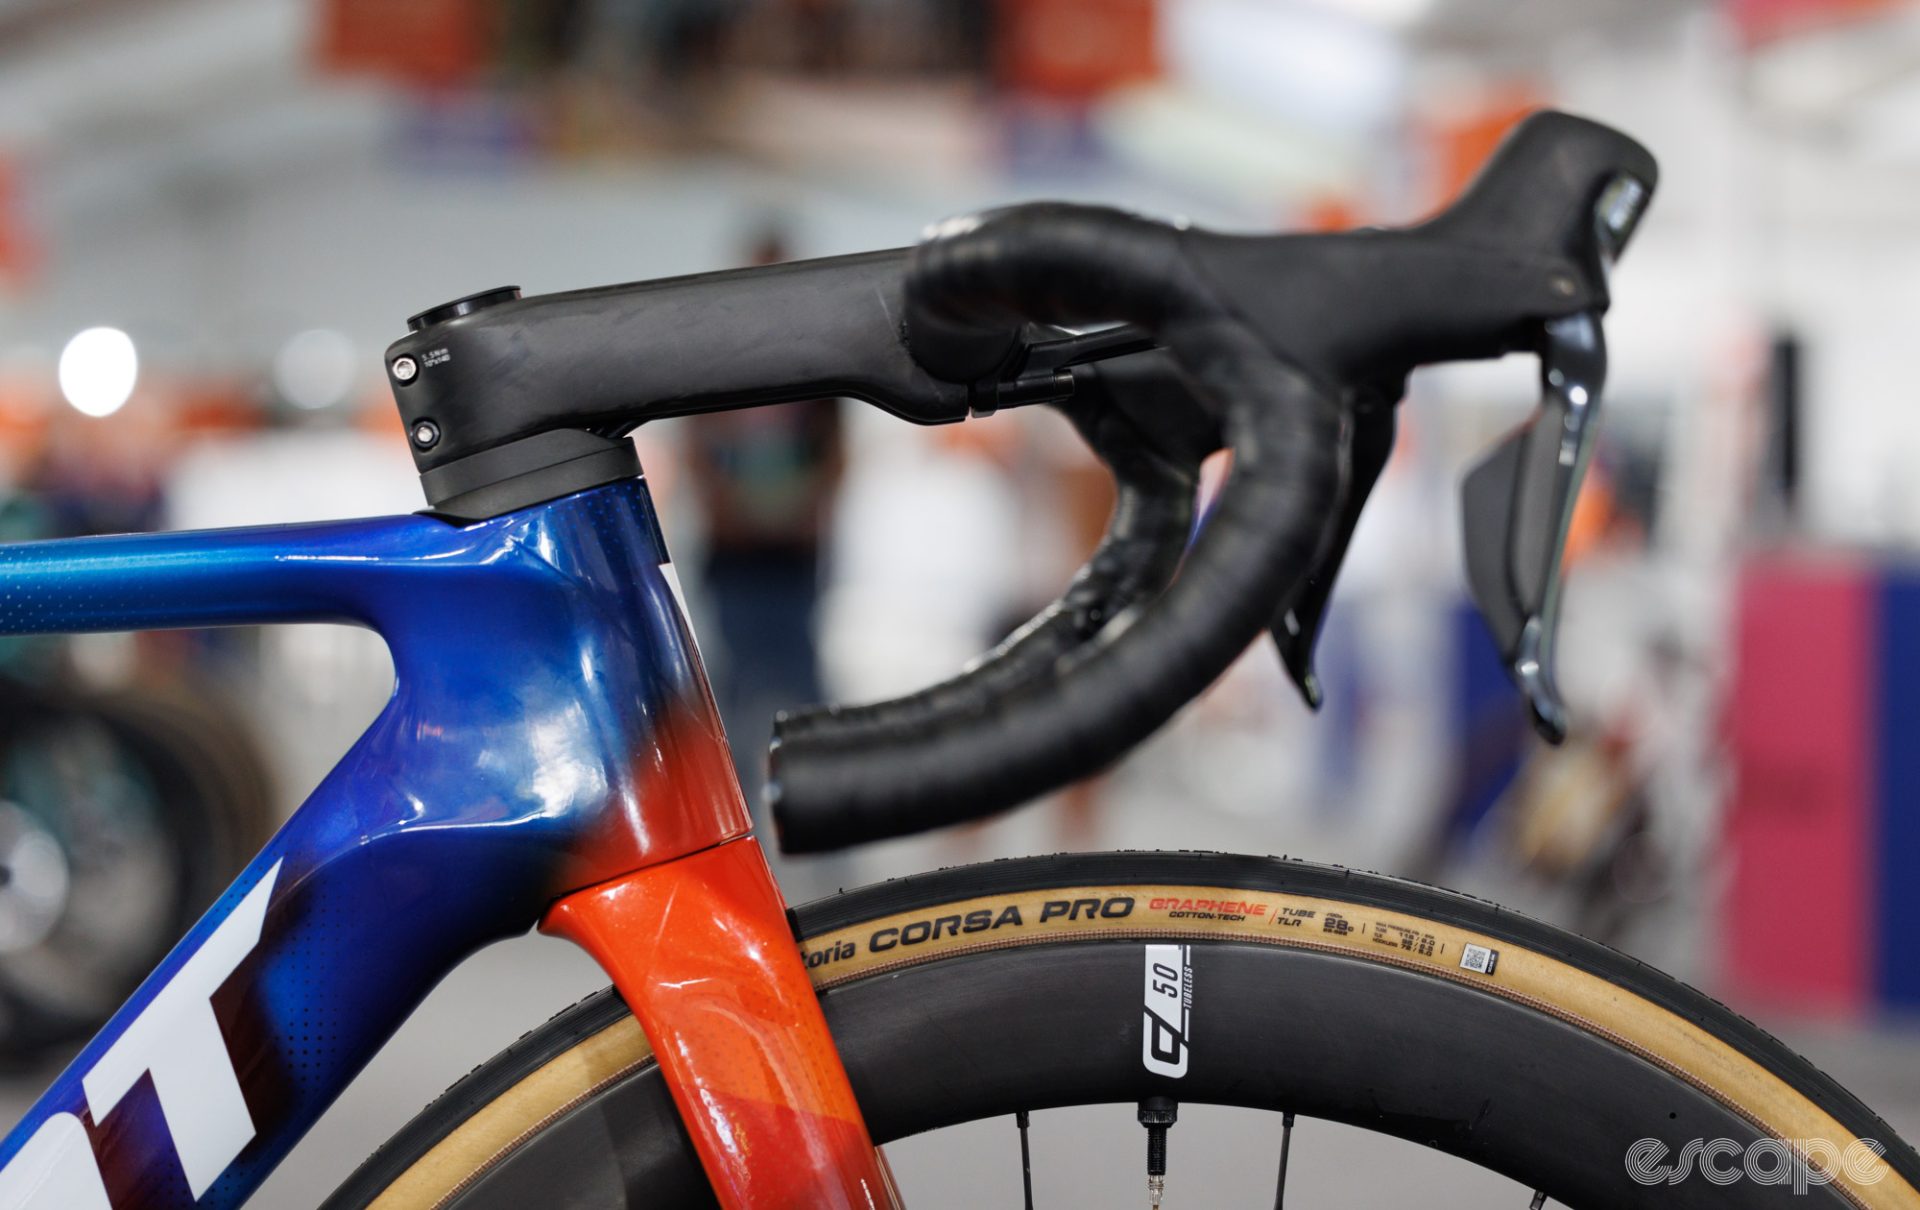 A side view of the Propel Advanced, showing the down-head-top tube junction and aero shaping.